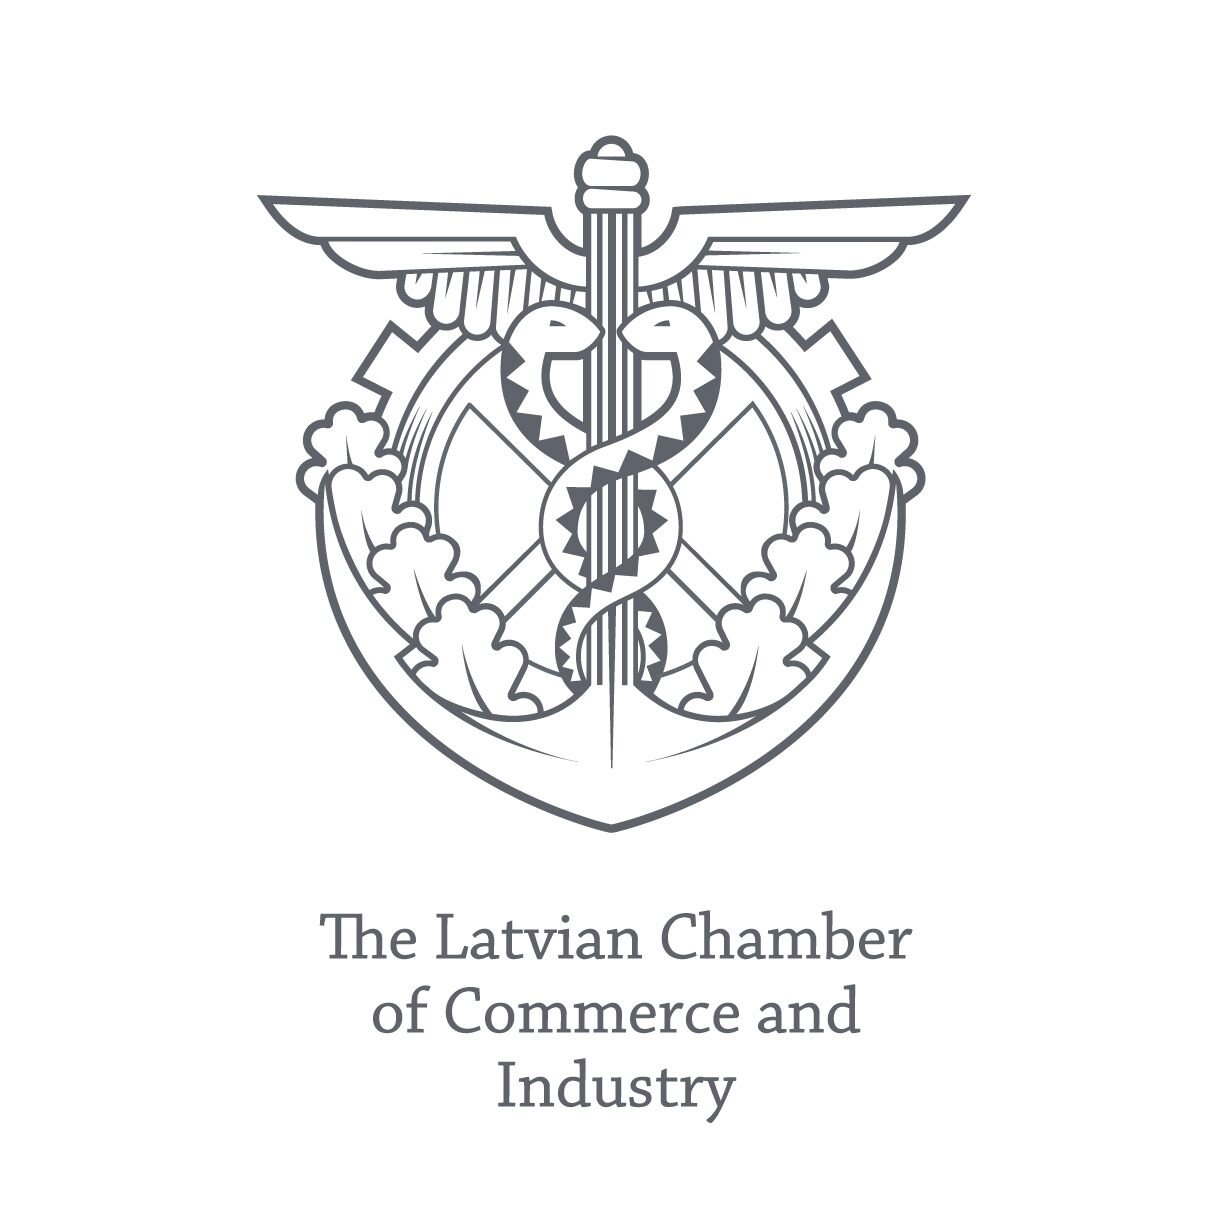 The Latvian Chamber of Commerce and Industry